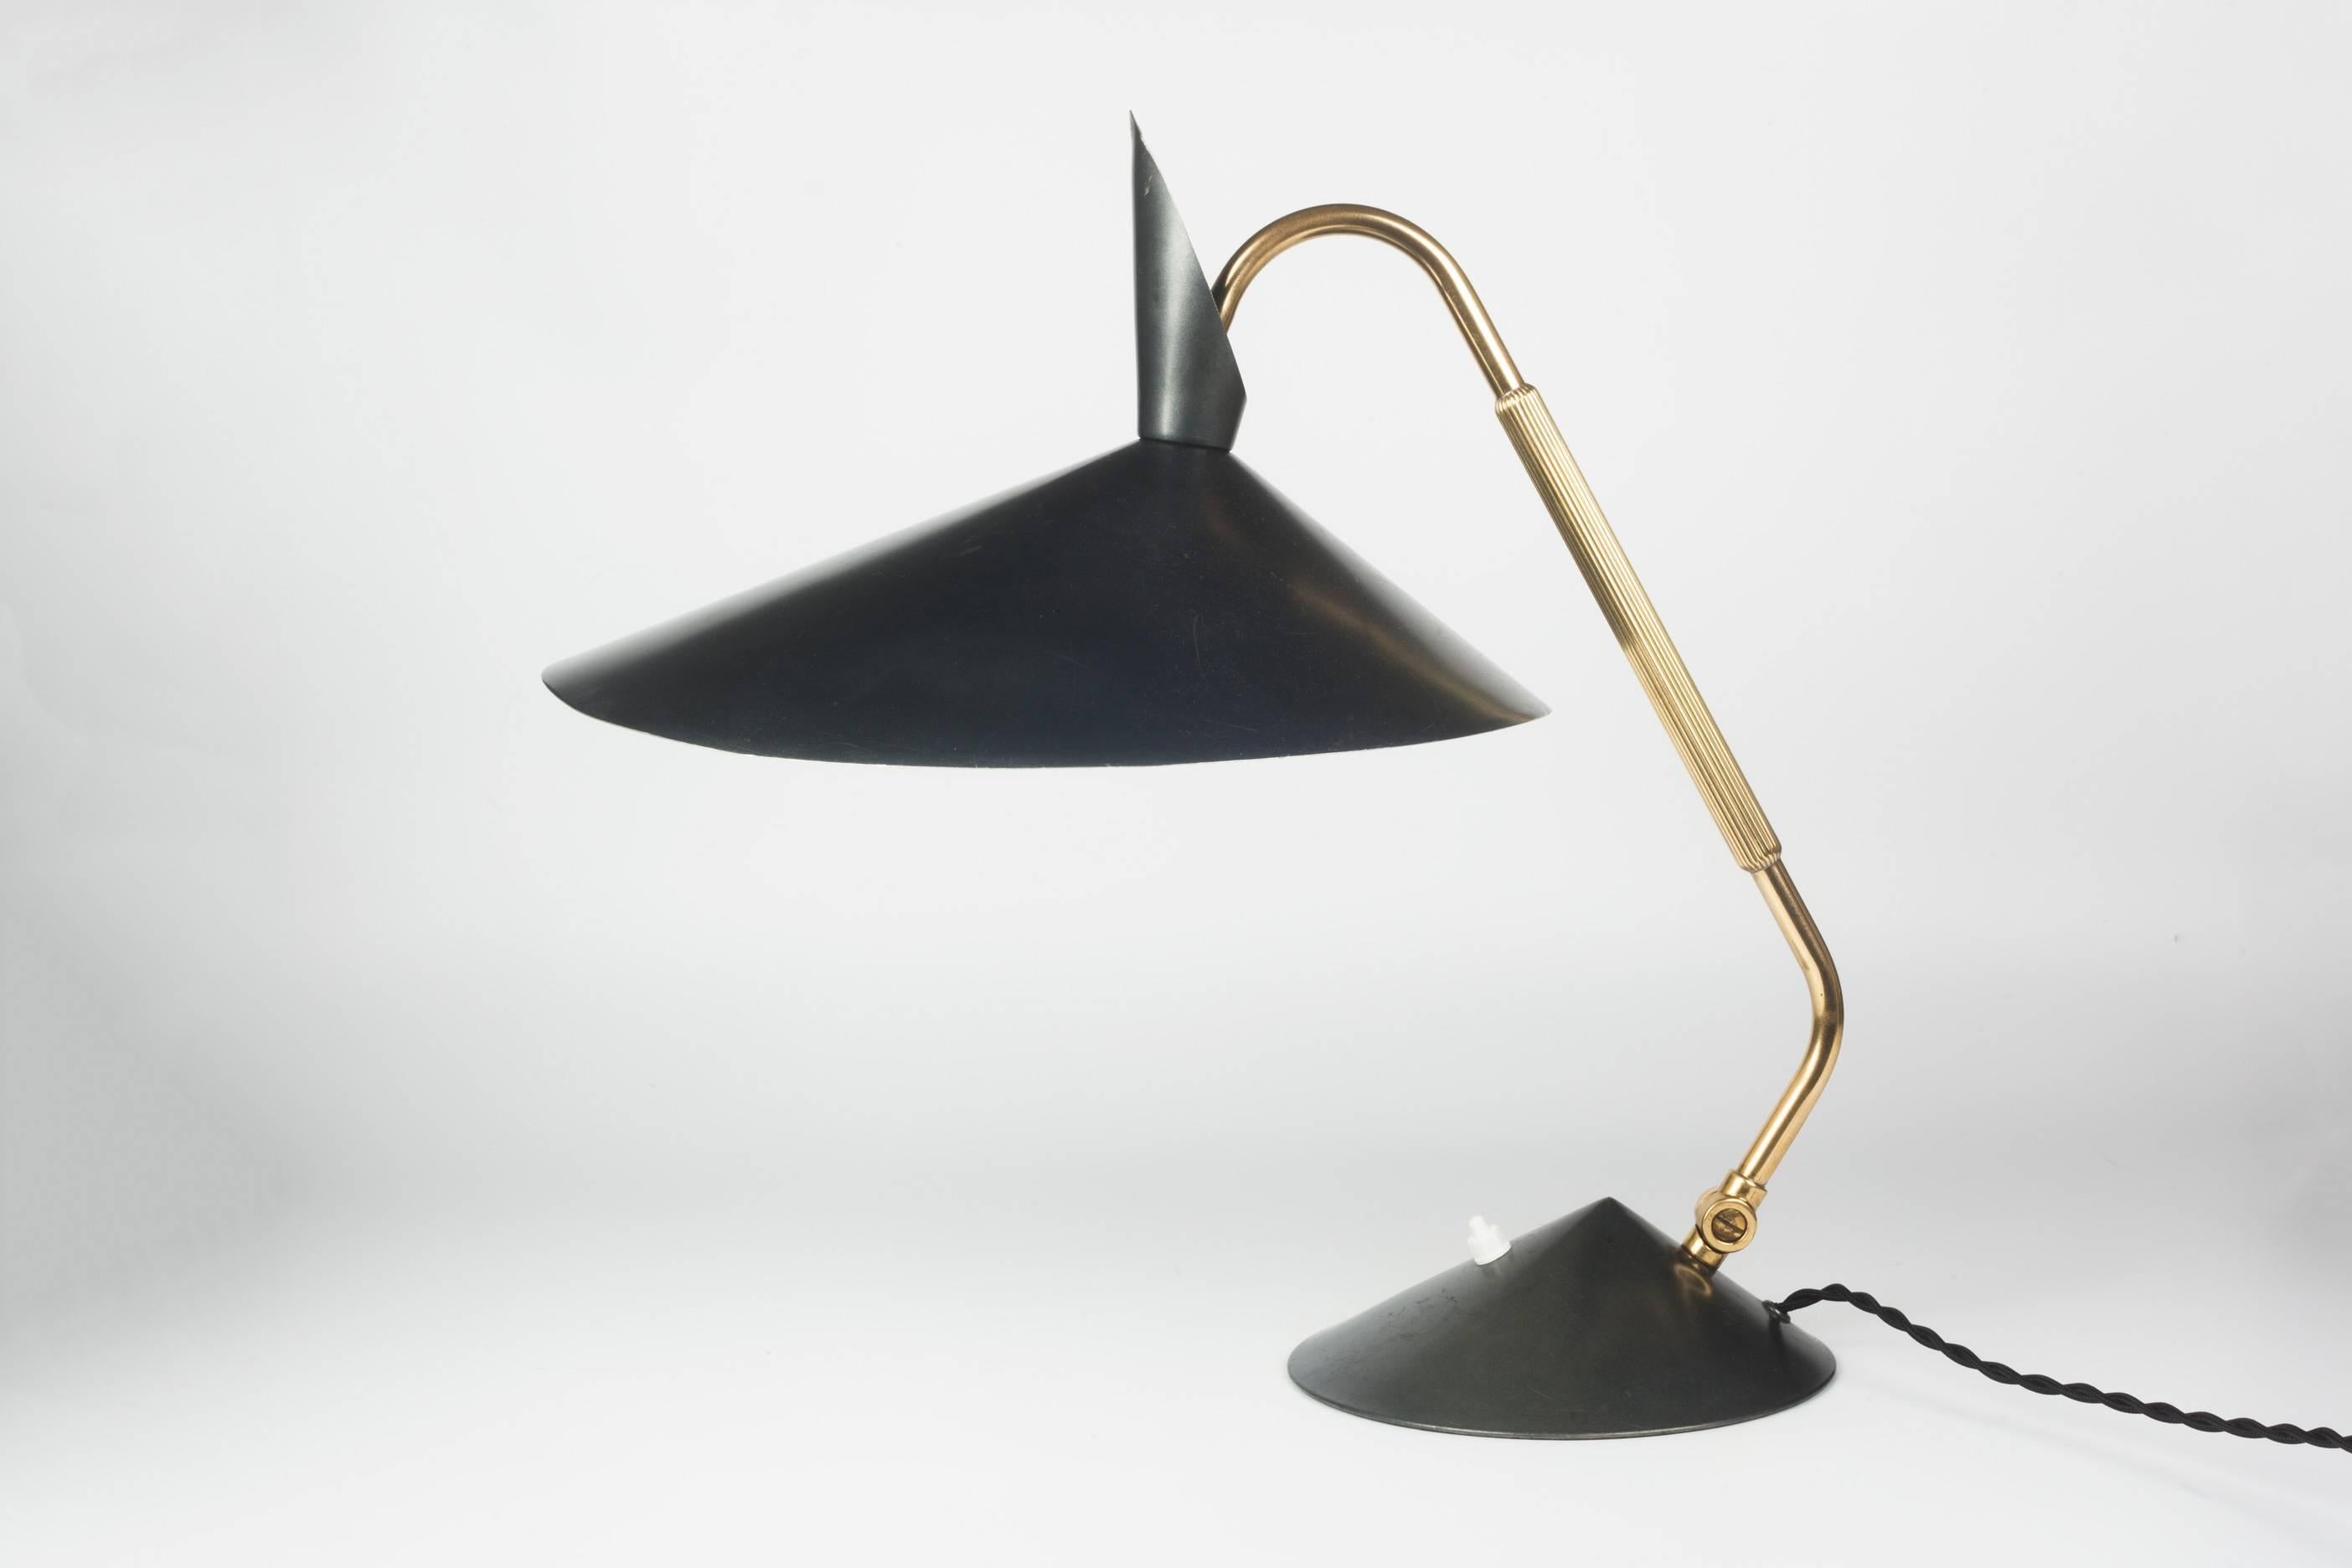 Large desk lamp in elephant grey and brass by Kaiser Leuchten. Made in Germany, 1960s. Large, organic shaped saucer shade and weighted pyramid base. At once classic and otherworldly, this lamp commands a strong presence in a room. Bakelite switch.